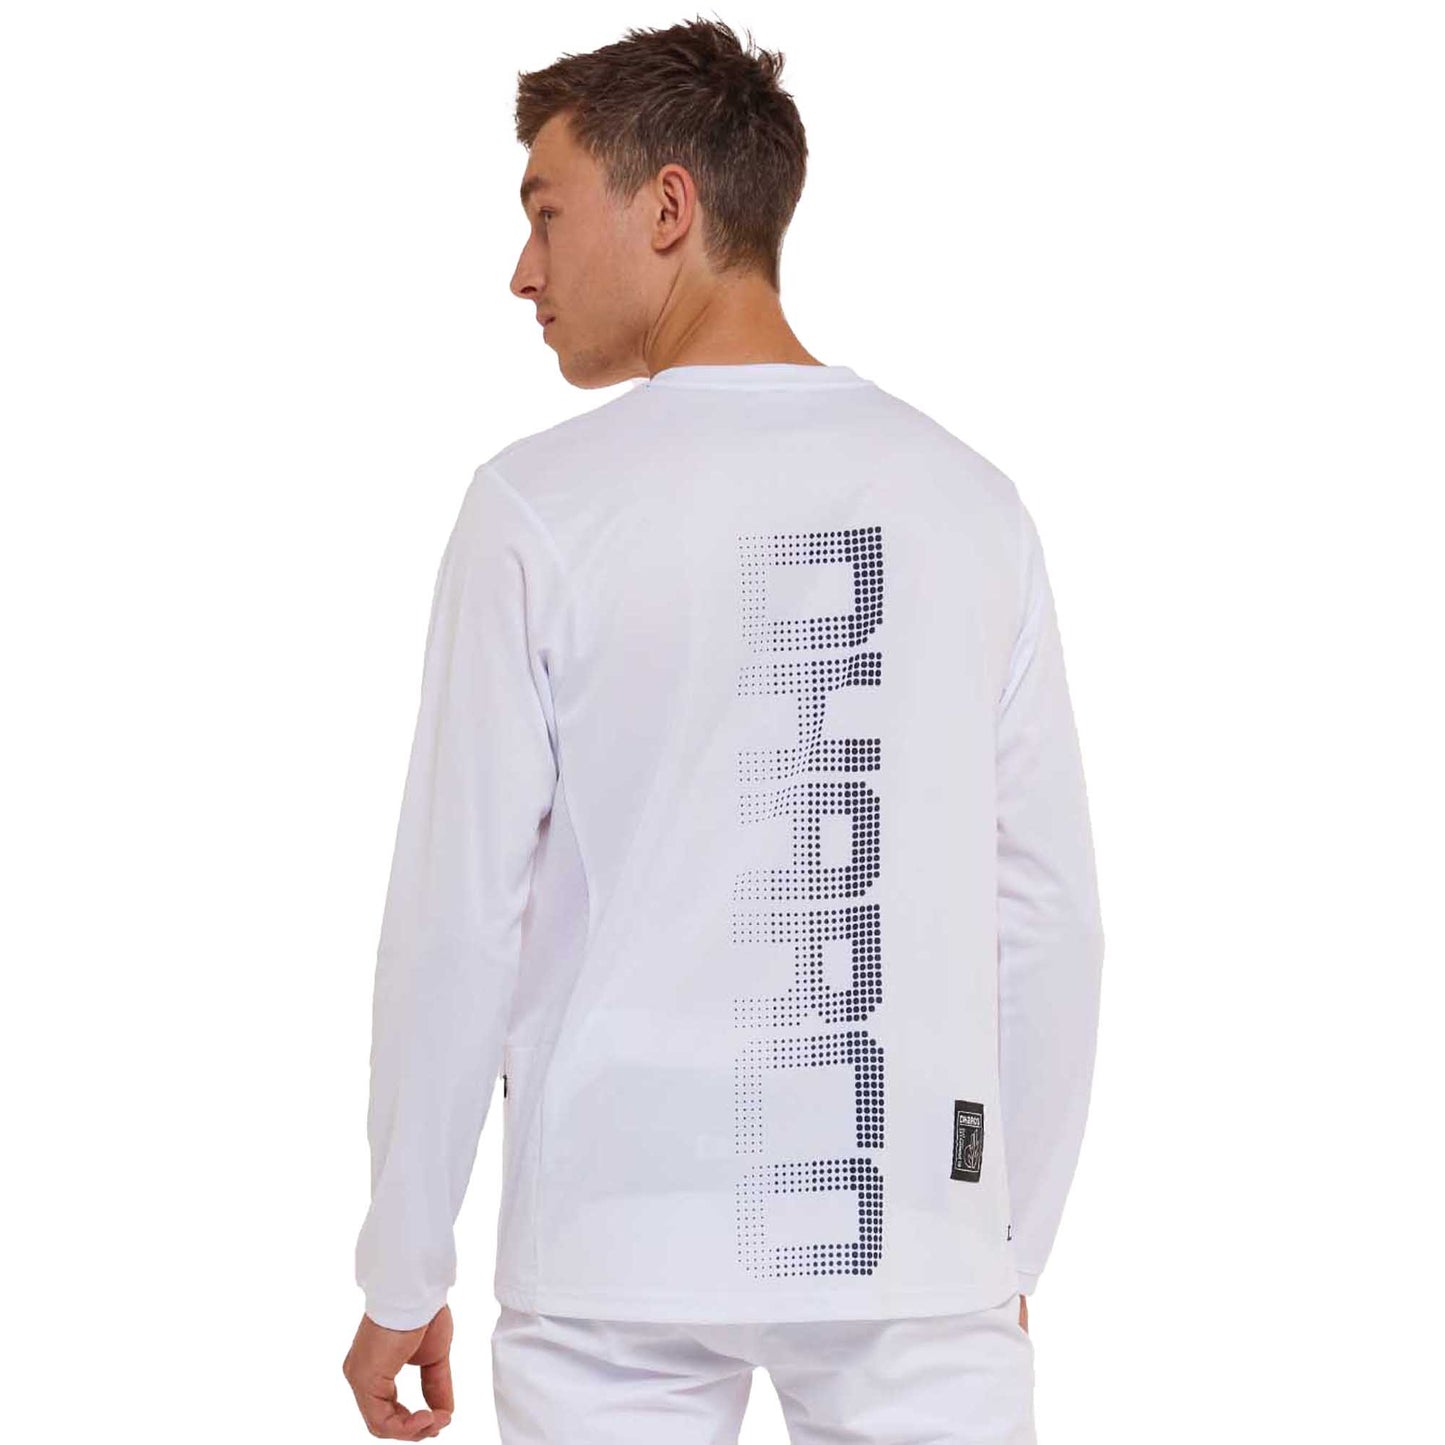 DHaRCO Men's Gravity Long Sleeve Jersey - L - White Out